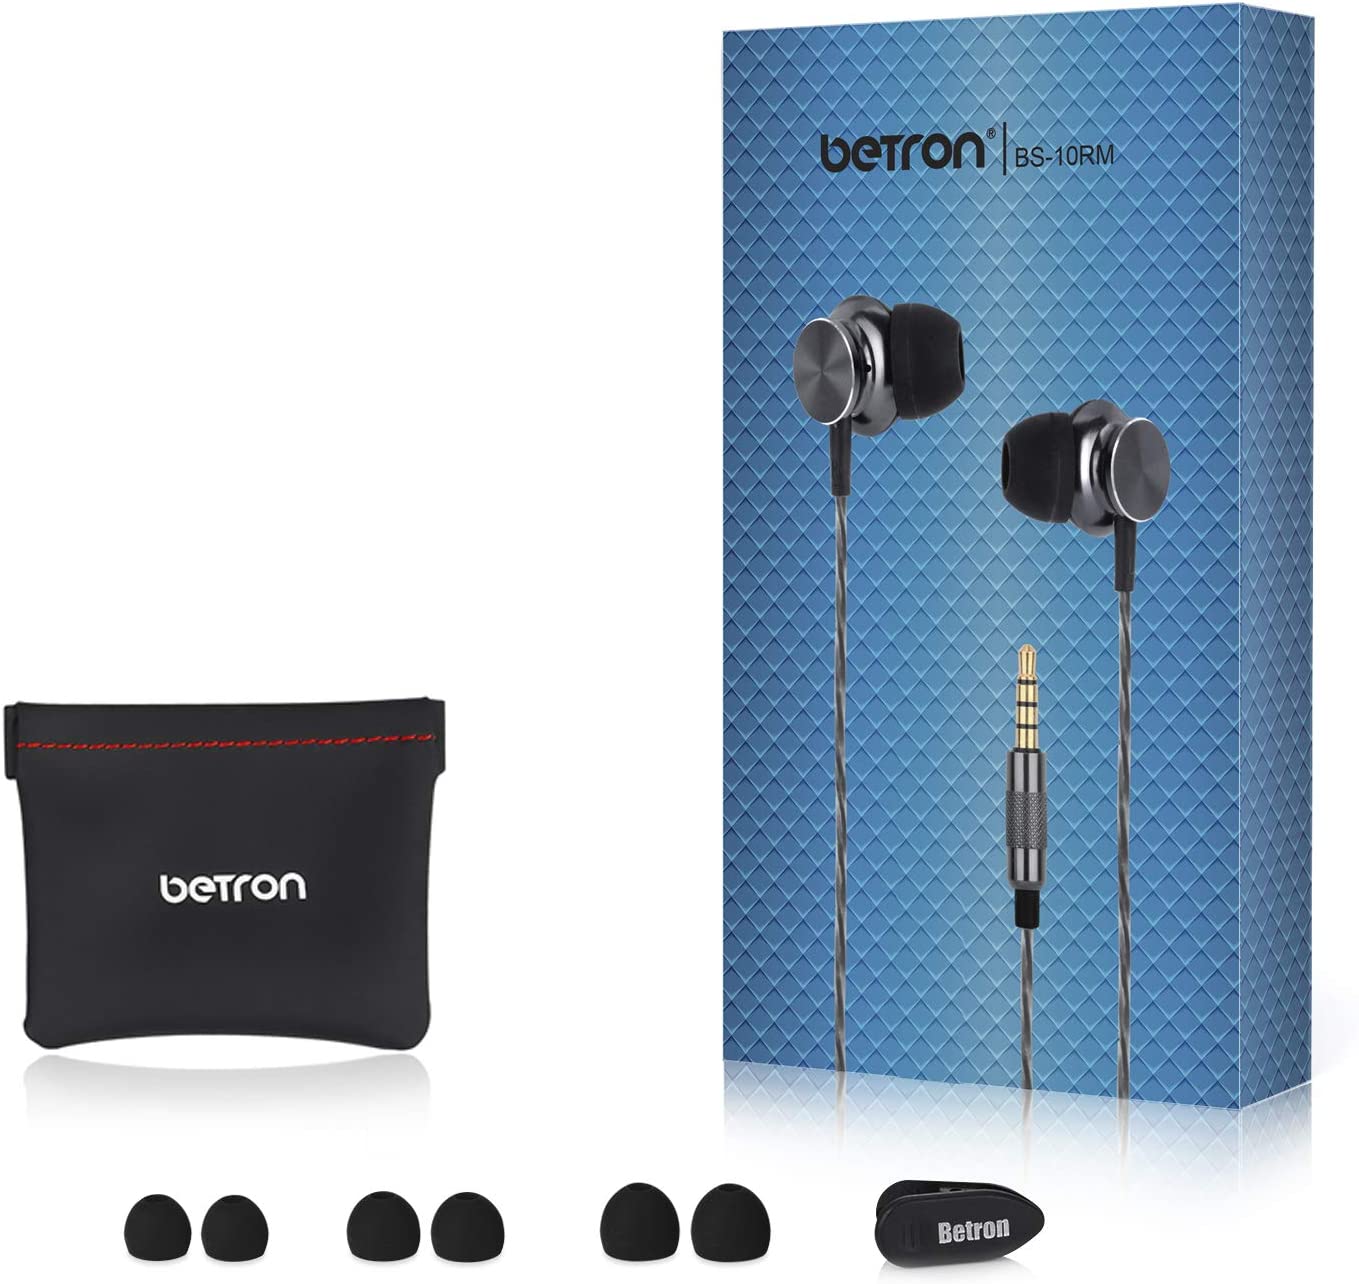 Betron Earphones Headphones Earbuds Powerful Bass Stereo Sound Comfy Fit BS10 